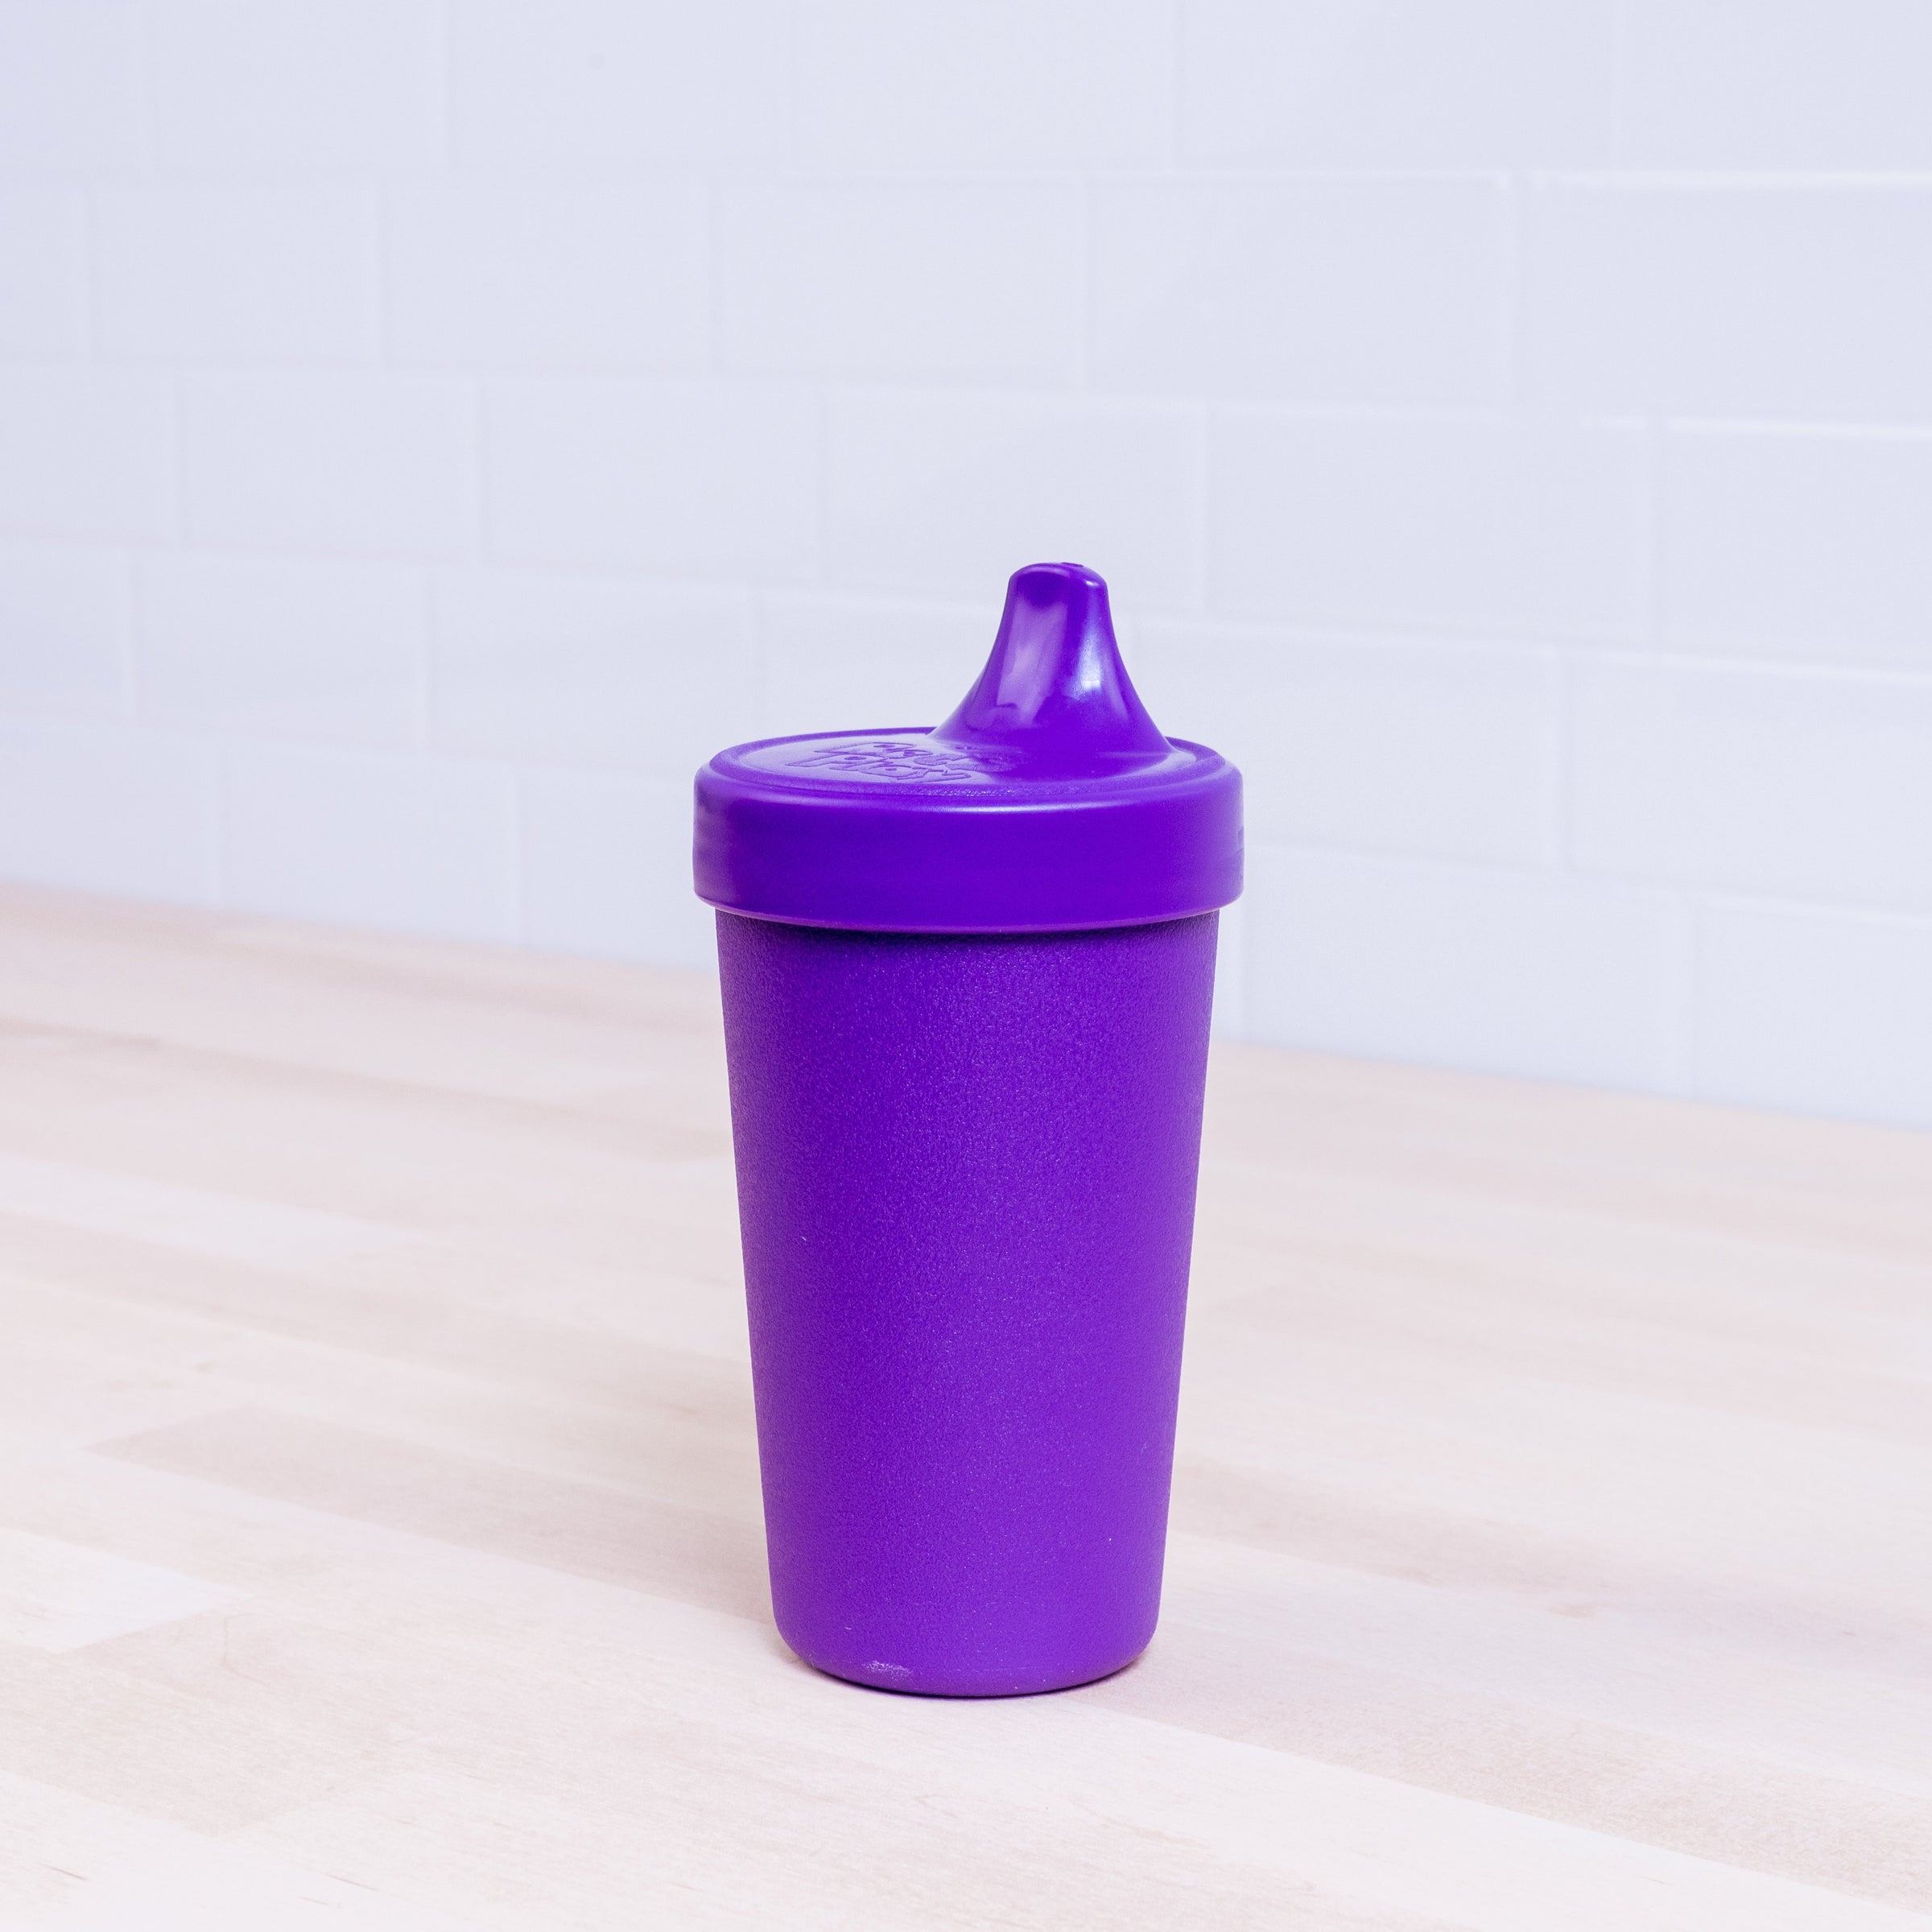 Re-Play No-Spill Sippy Cup